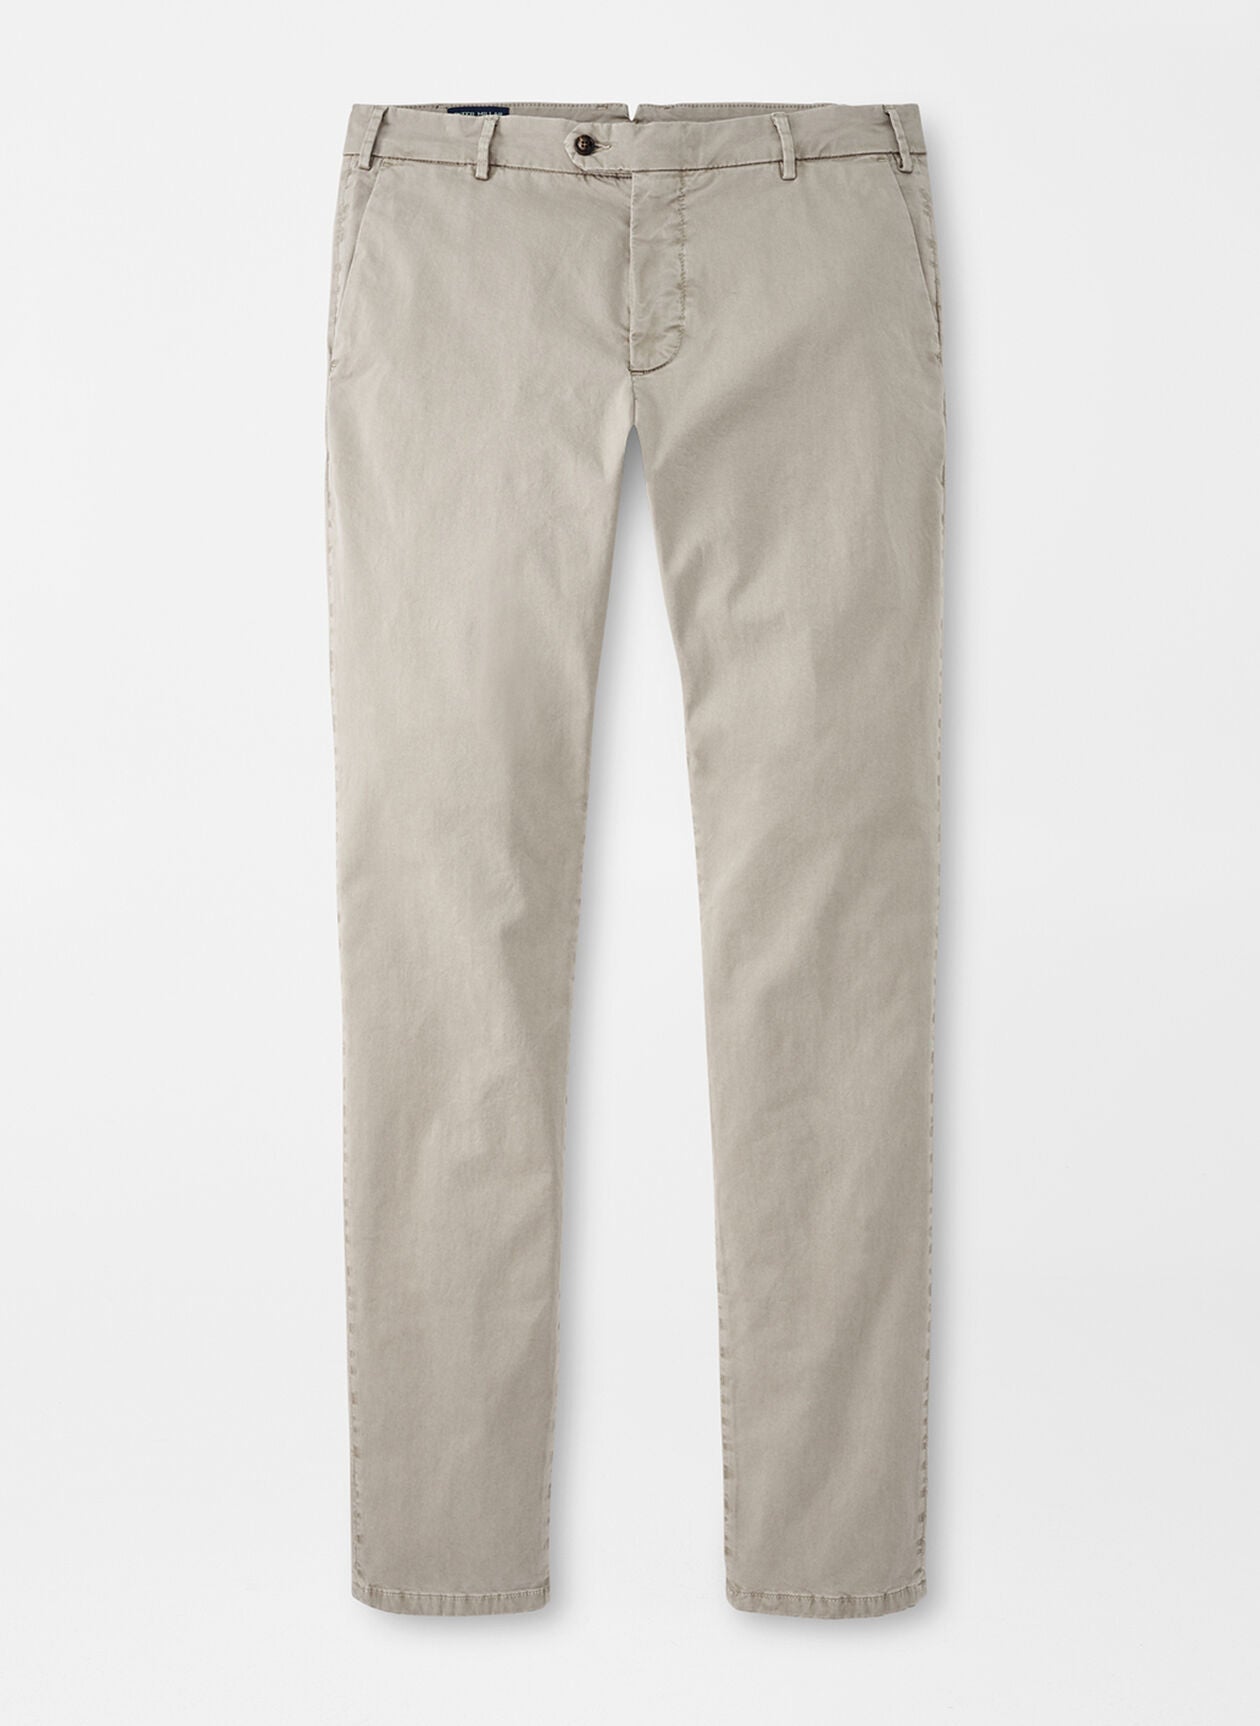 Concorde Garment Dyed Flat Front Pants